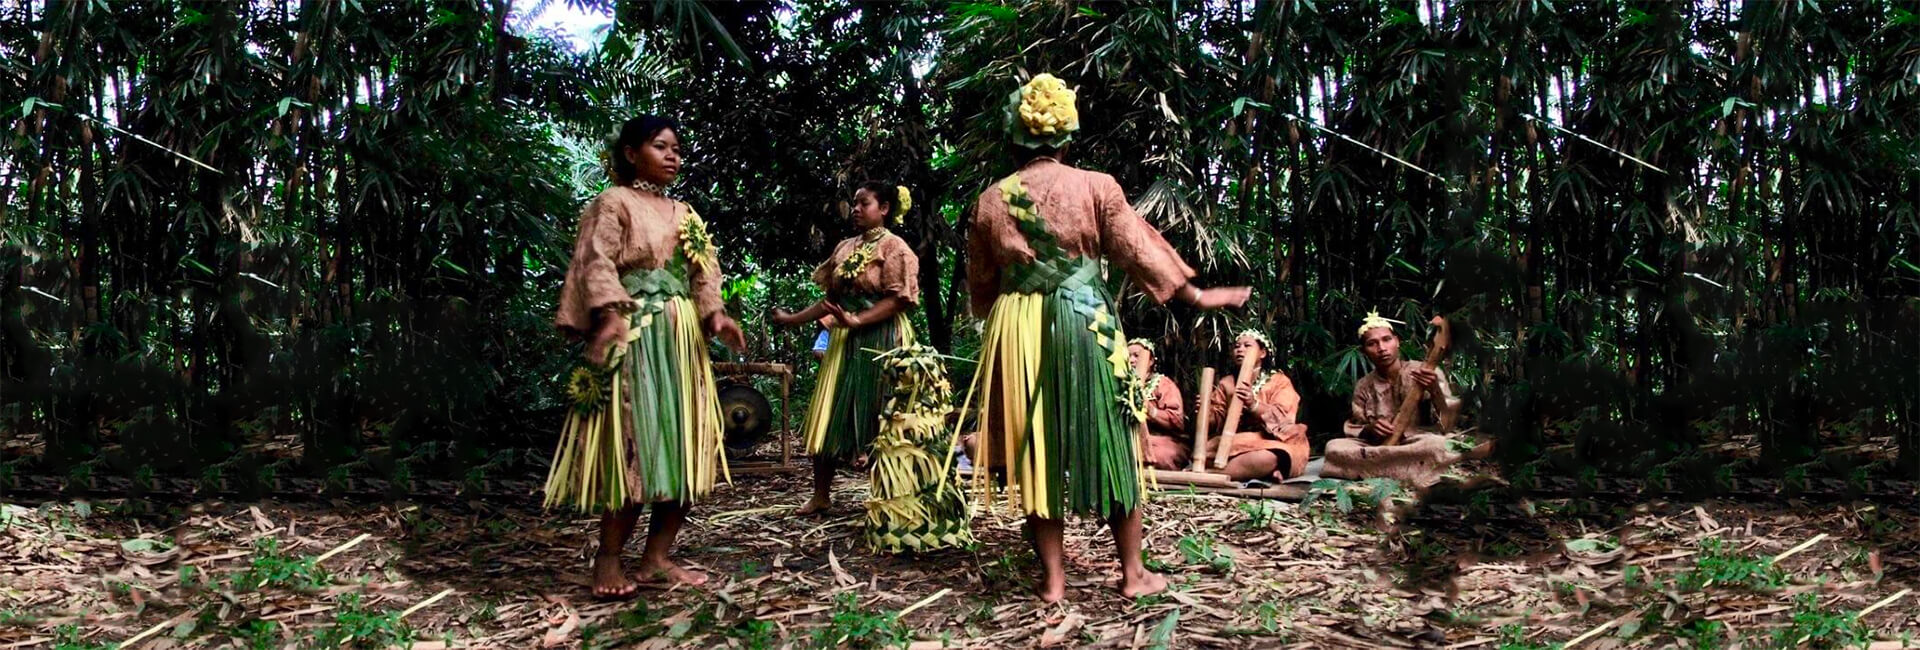 Ecoperformativity in the Song, Music, and Dance Tradition of the Indigenous Mah Meri of Malaysia